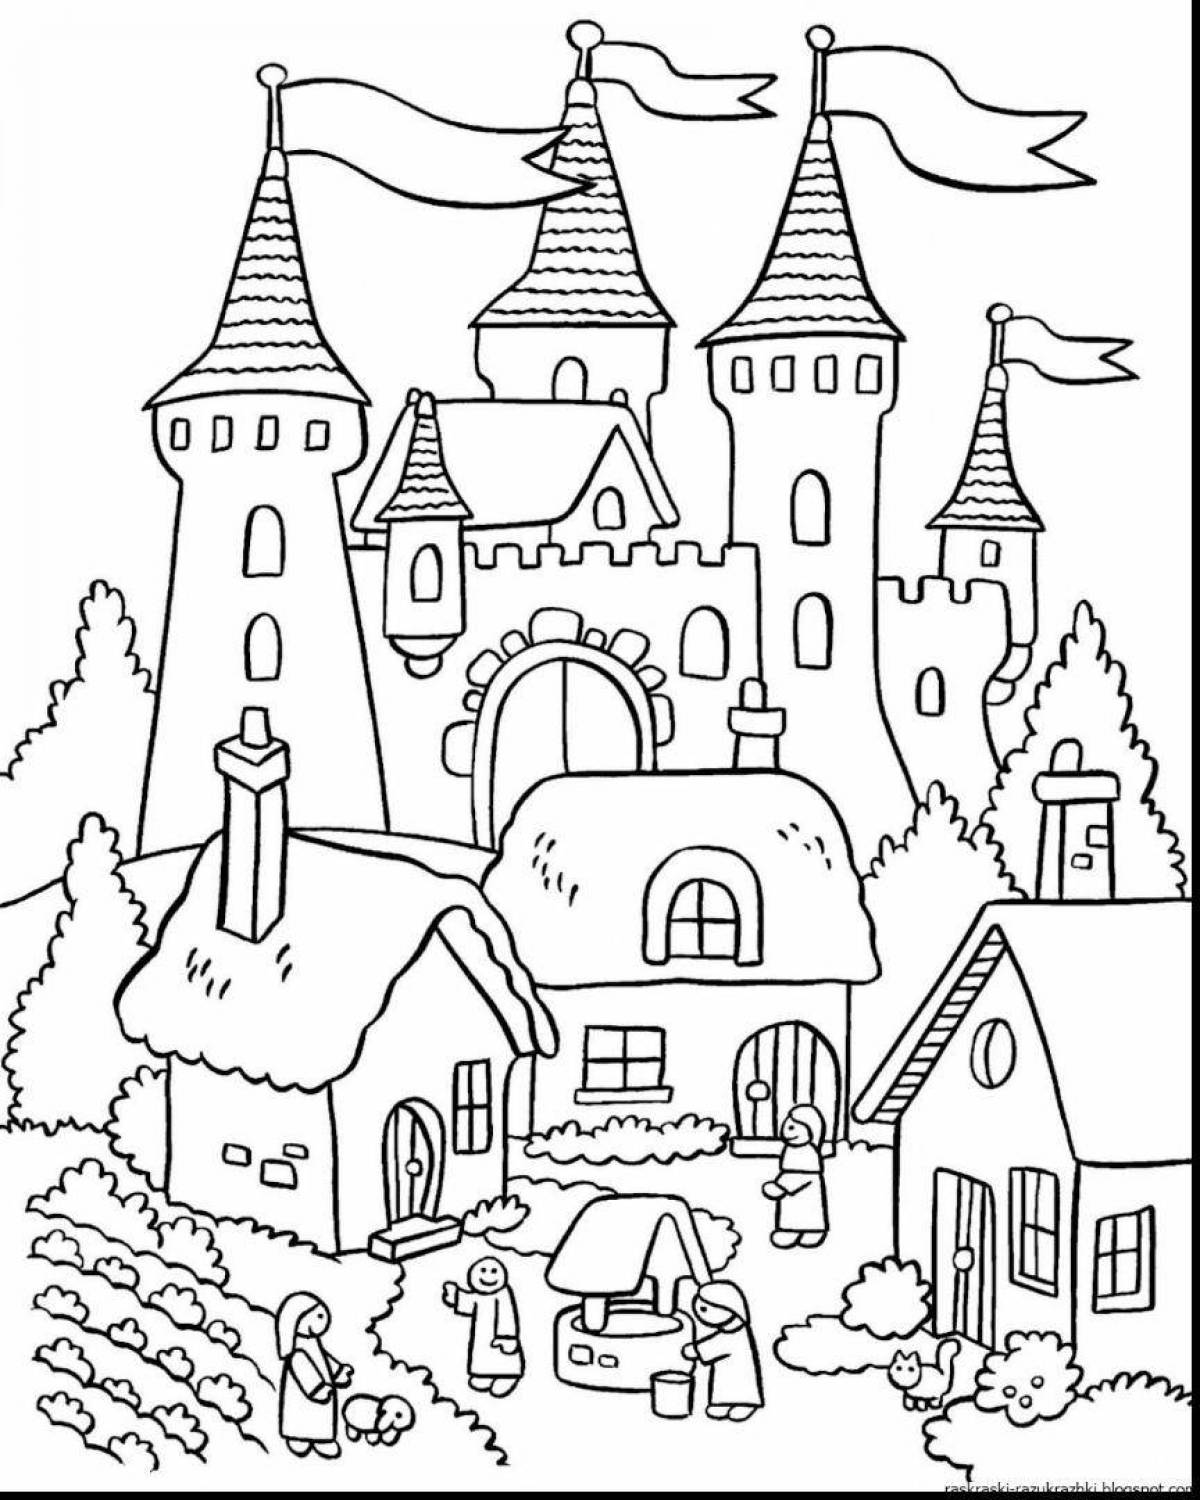 Coloring book glowing magic castle